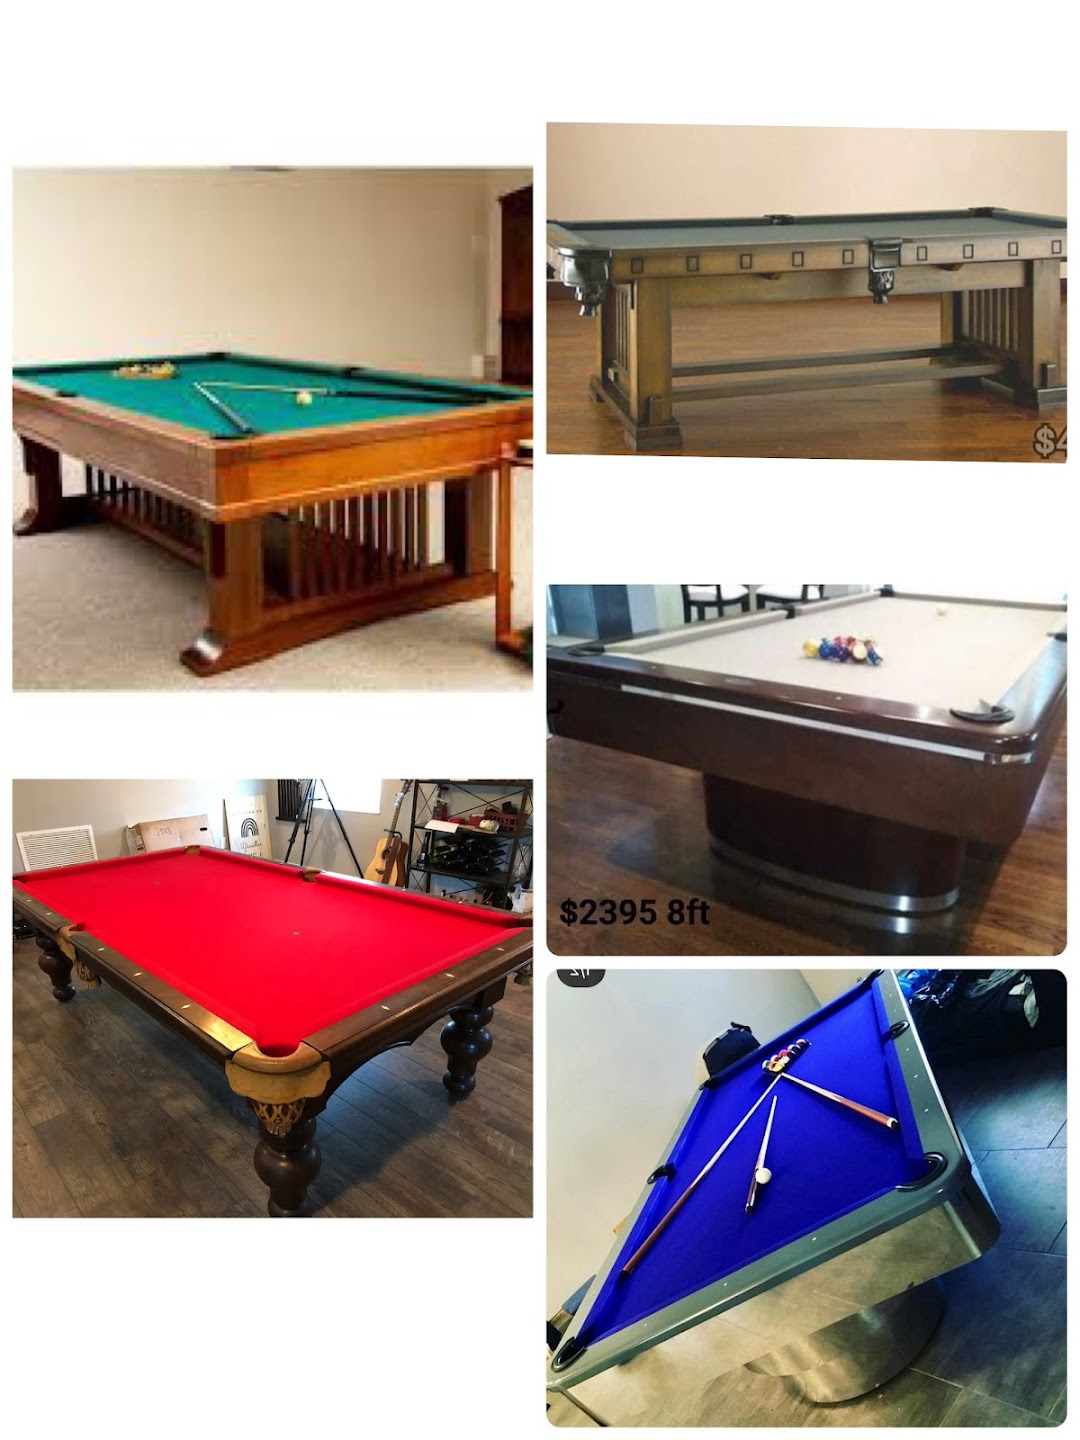 Randy’s Billiard Pool Tables Sales And Services